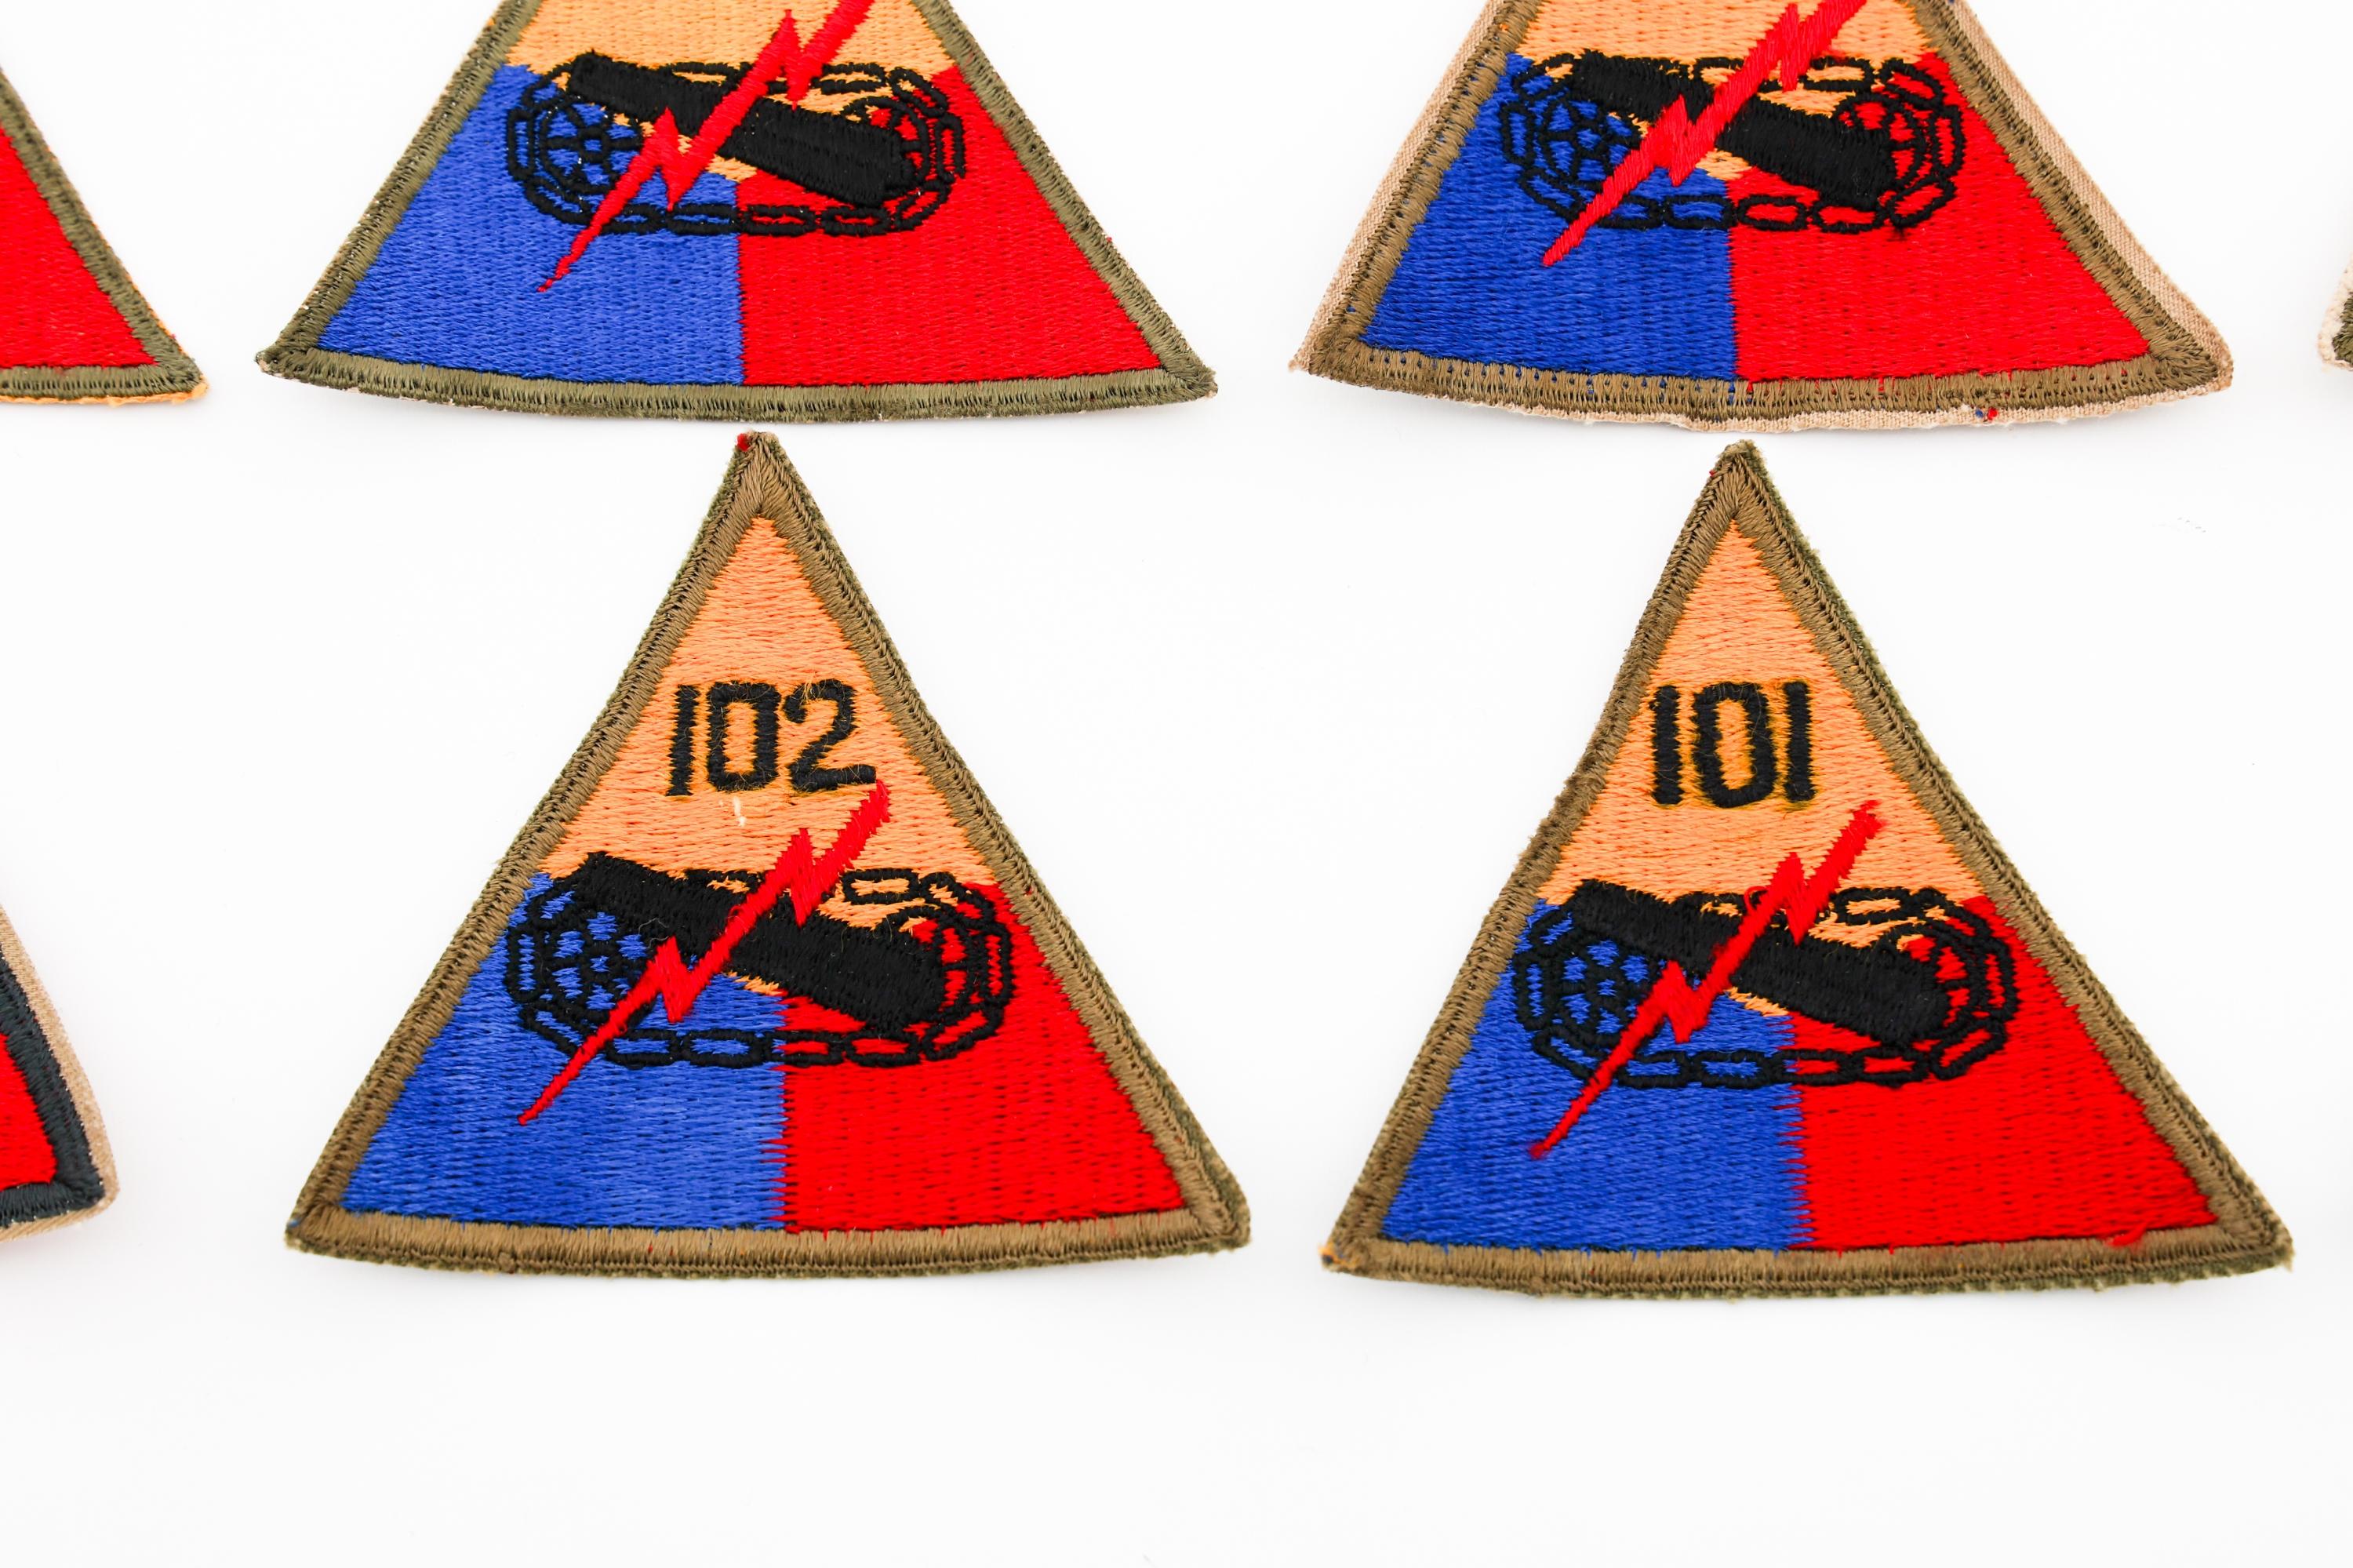 COLD WAR - CURRENT US ARMY TANK BATALLION PATCHES